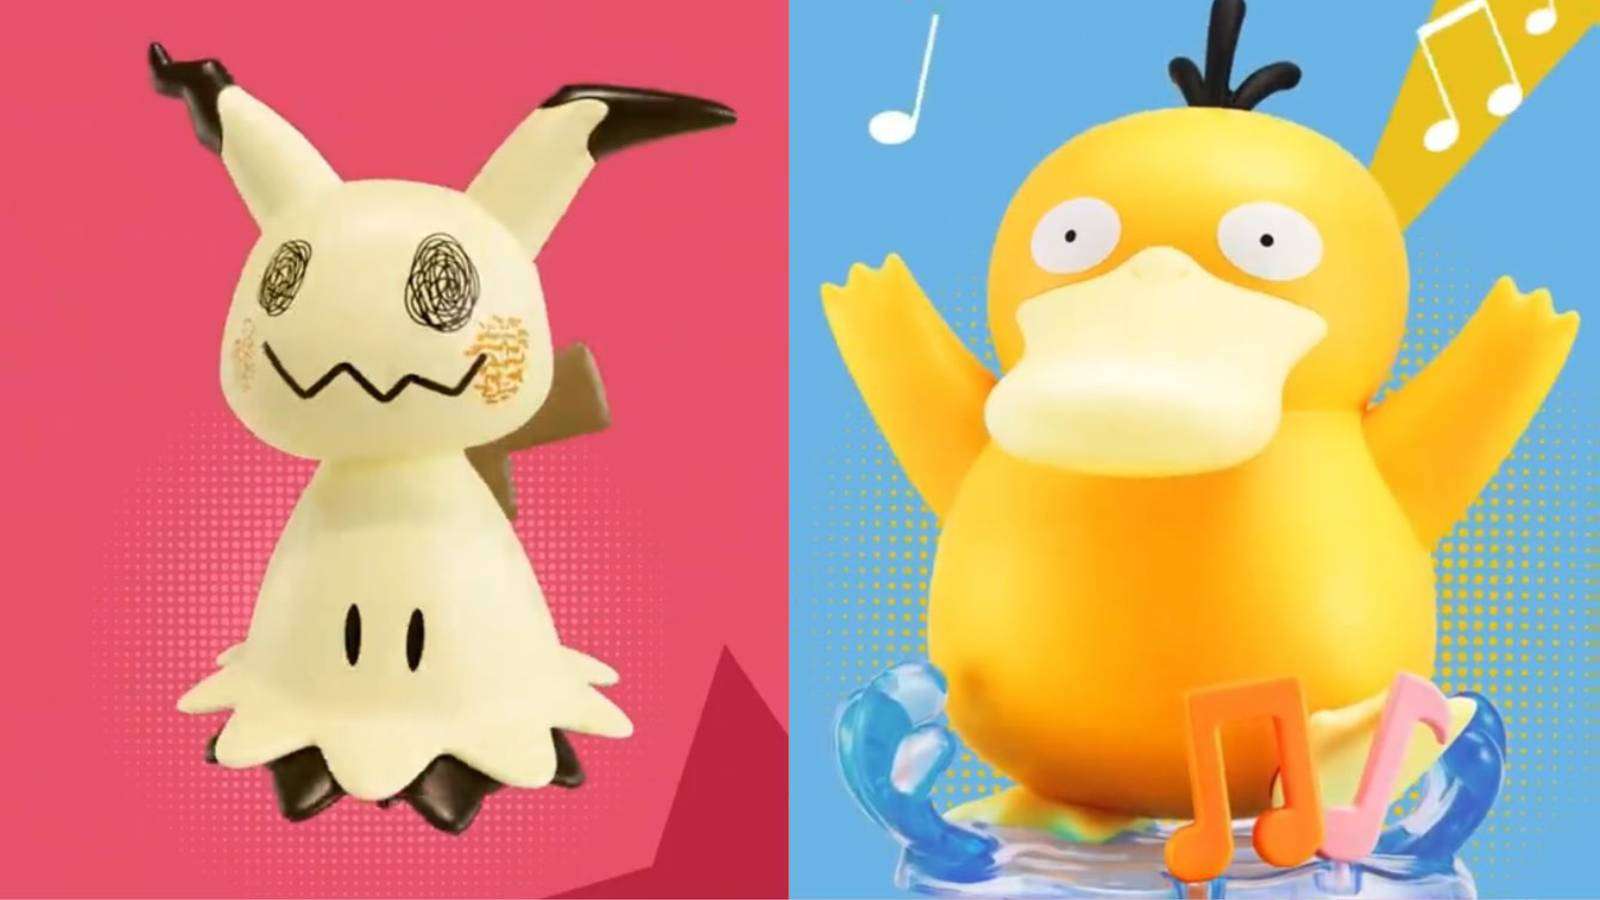 Promotional artwork from KFC shows toys of the Pokemon Mimikyu and Psyduck